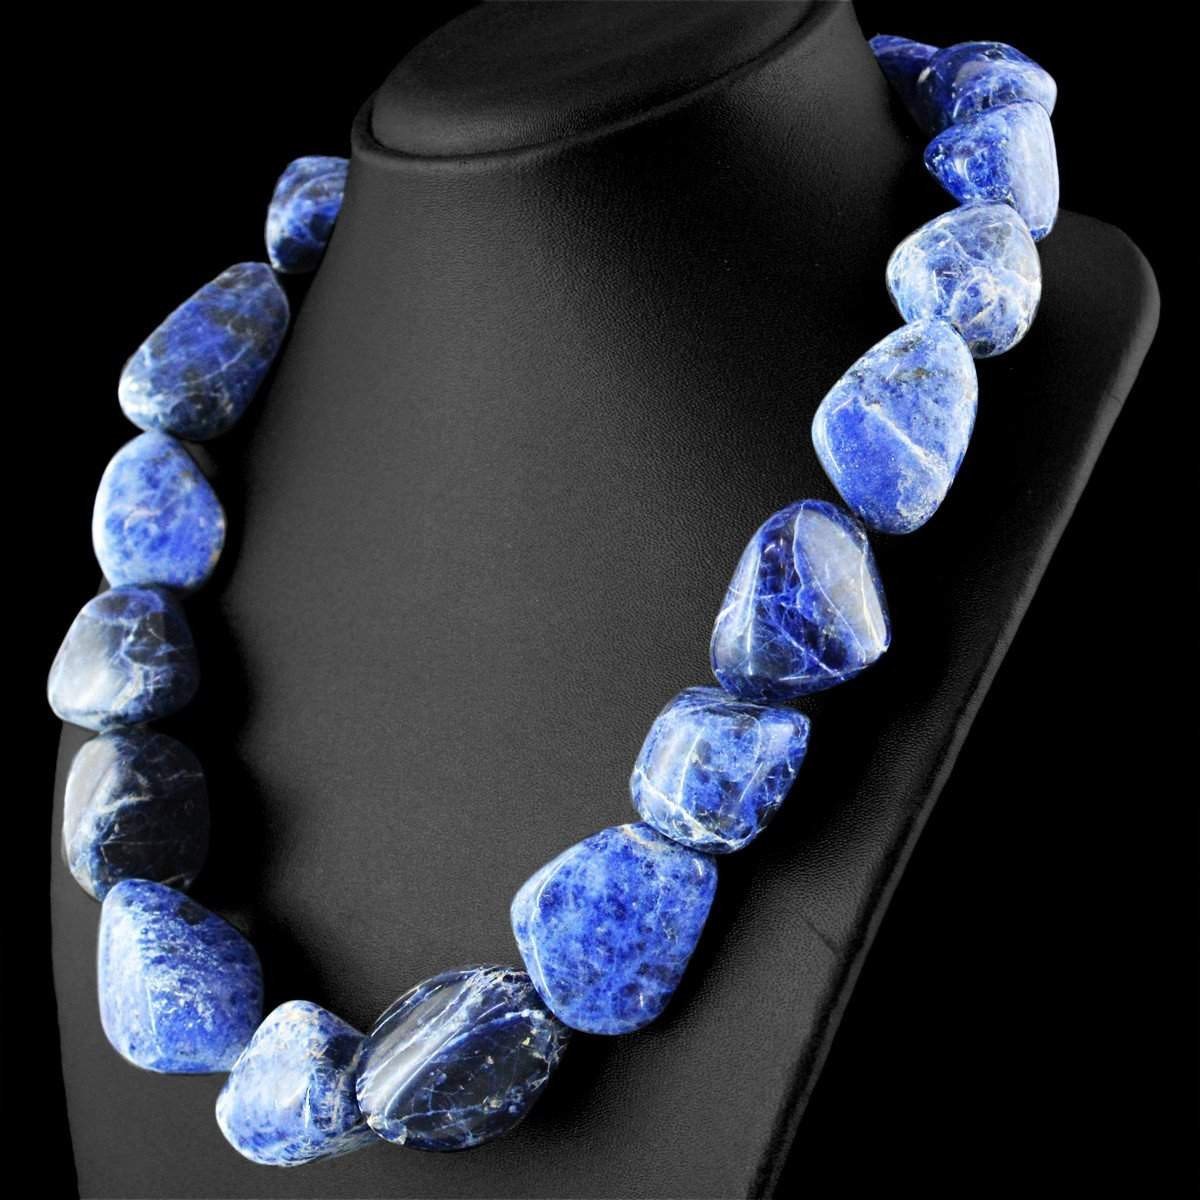 gemsmore:Natural Blue Sodalite Necklace 20 Inches Long Genuine Beads